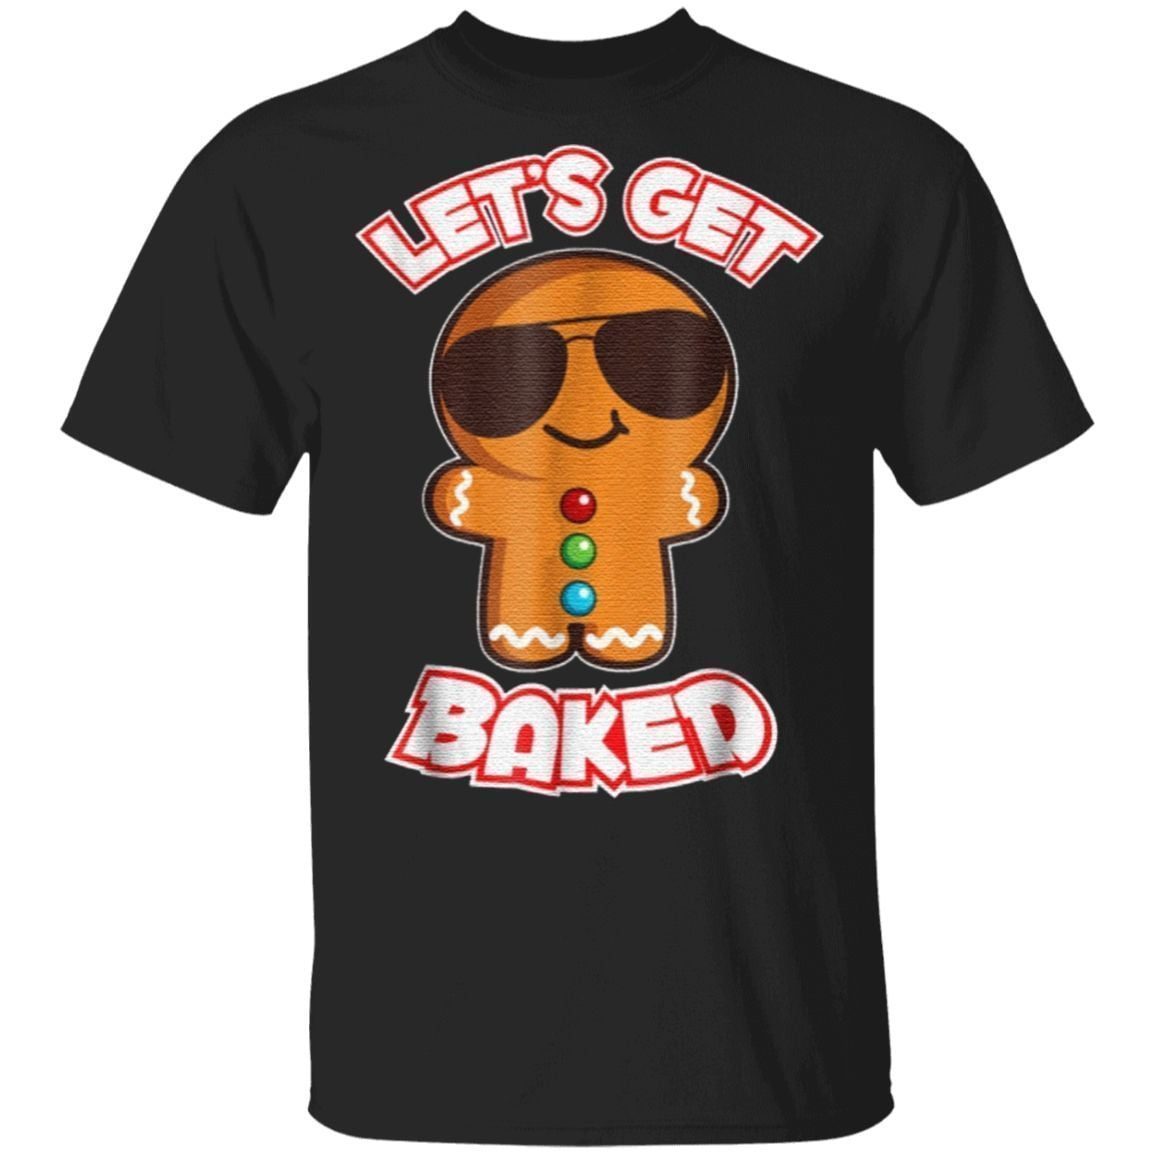 Let’s Get Baked TShirt